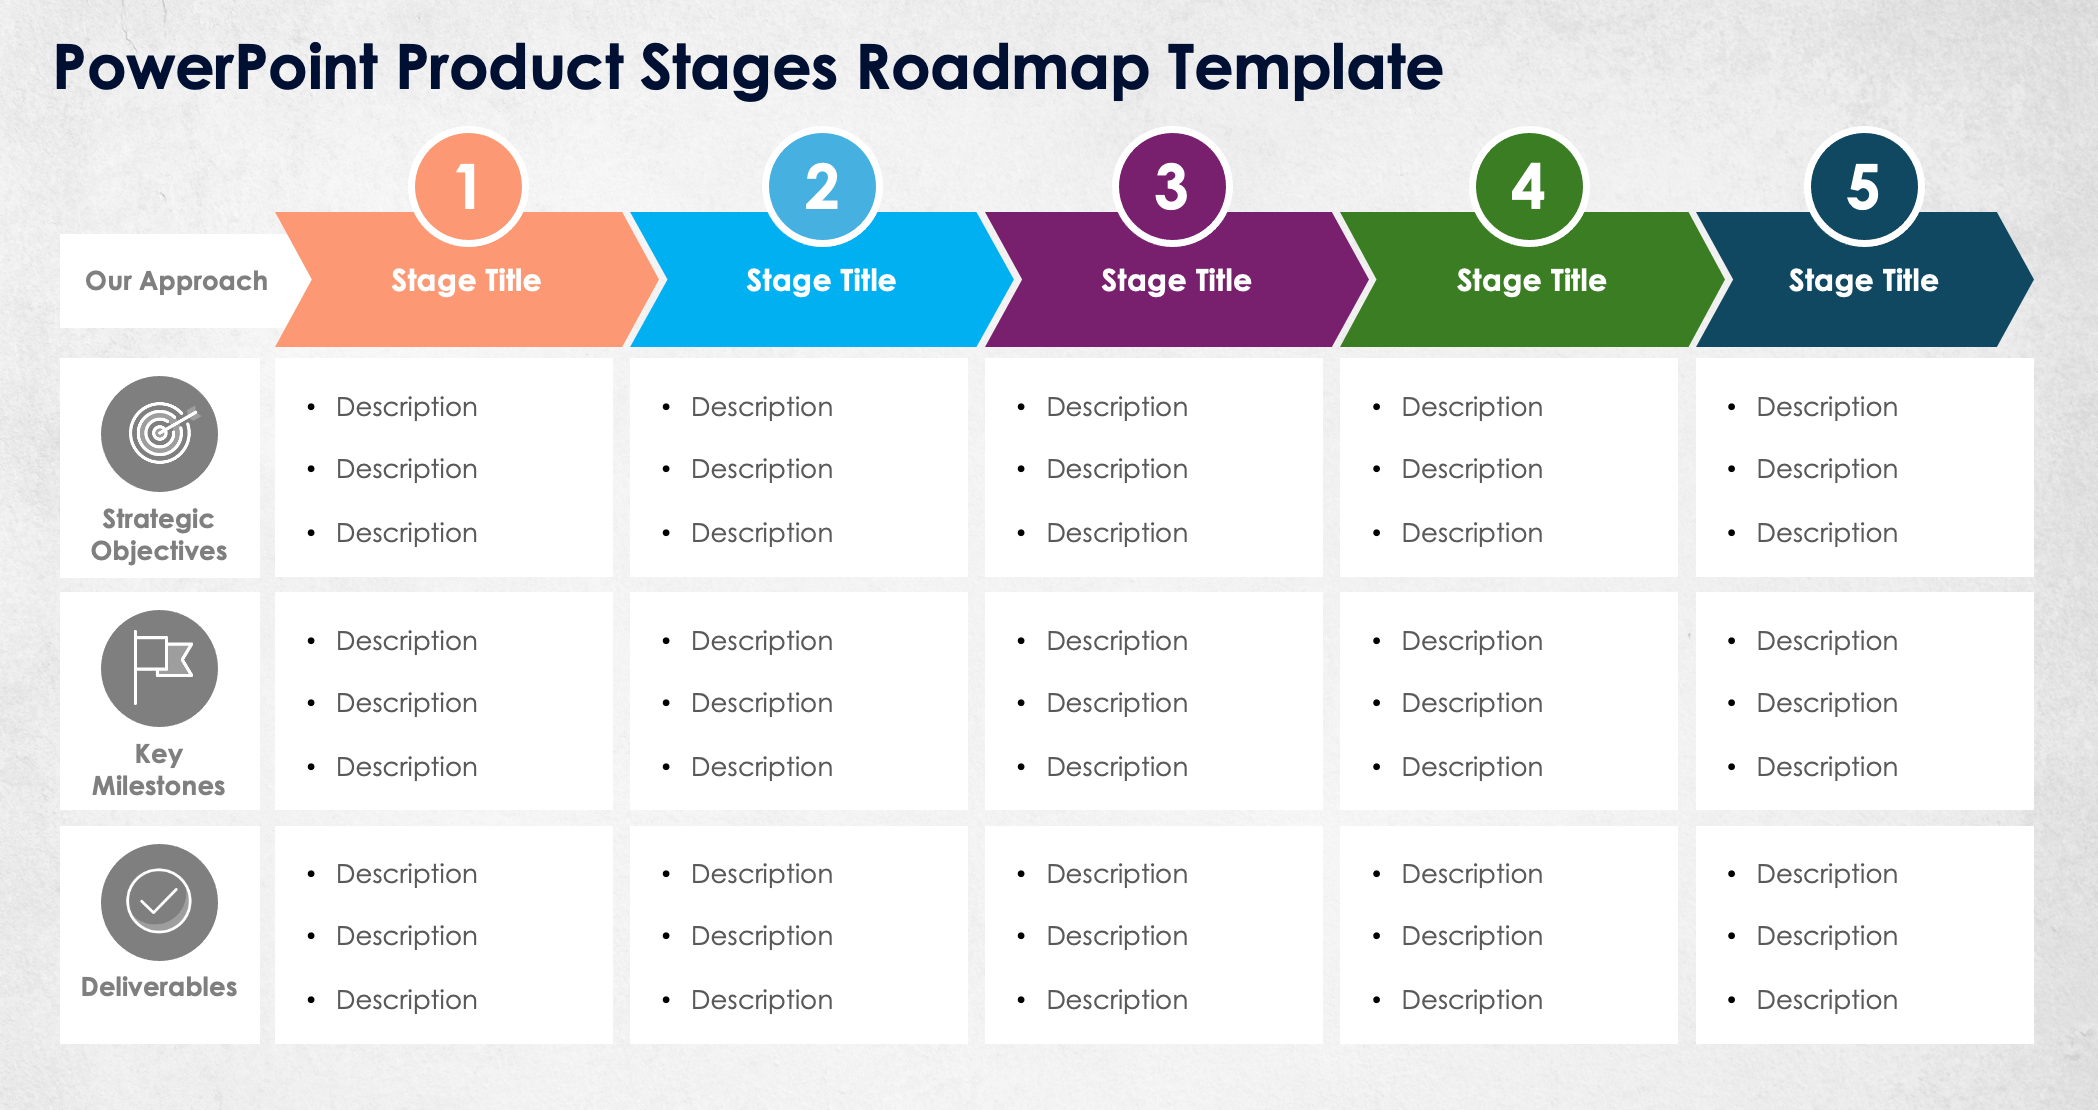 PowerPoint Product Stages Roadmap Template